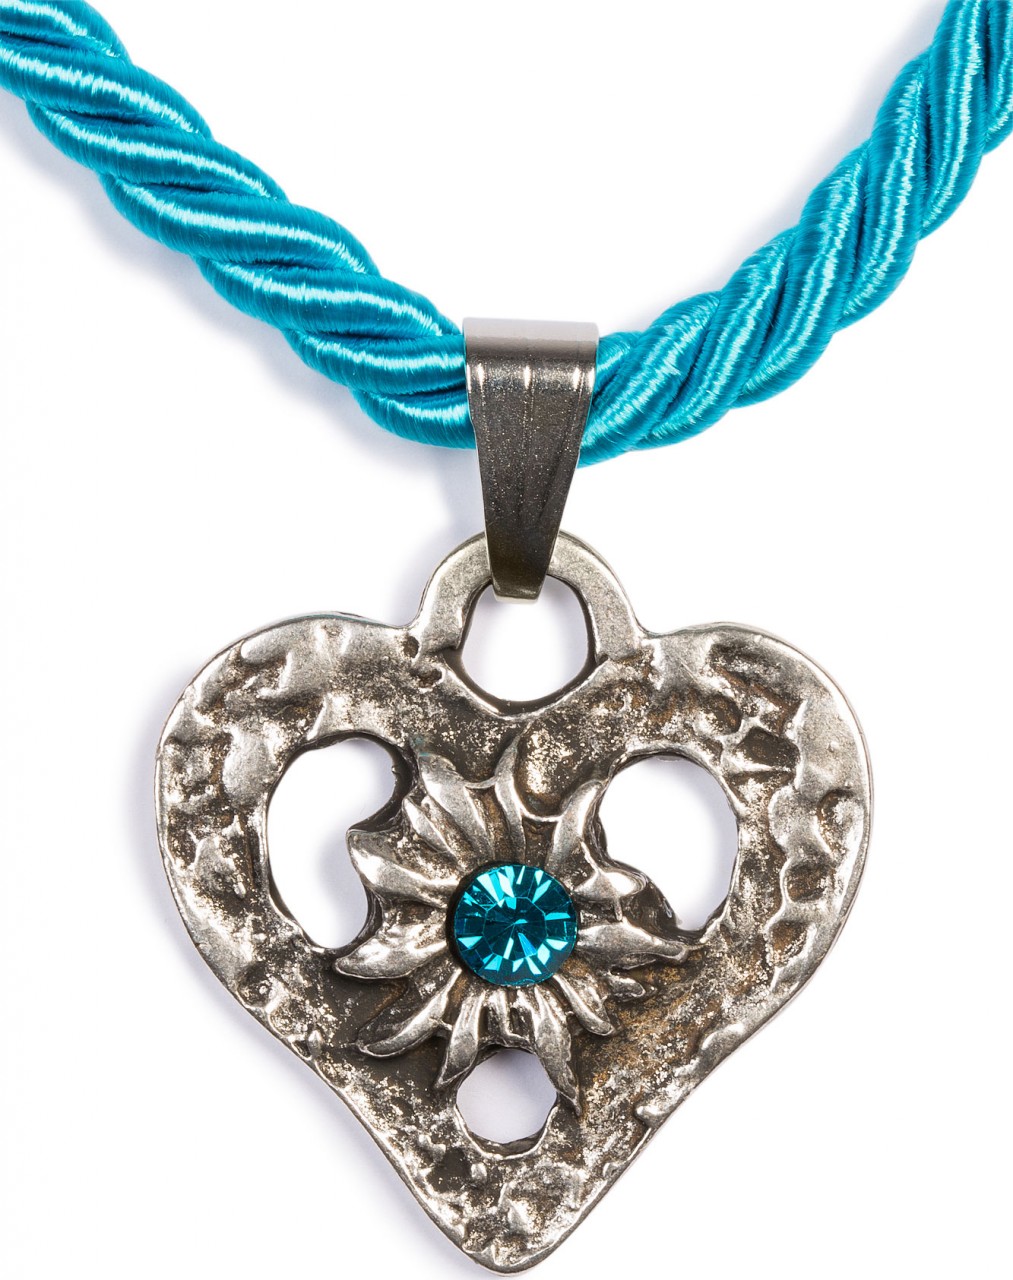 Braid Necklace with Heart Pendant, Turquoise